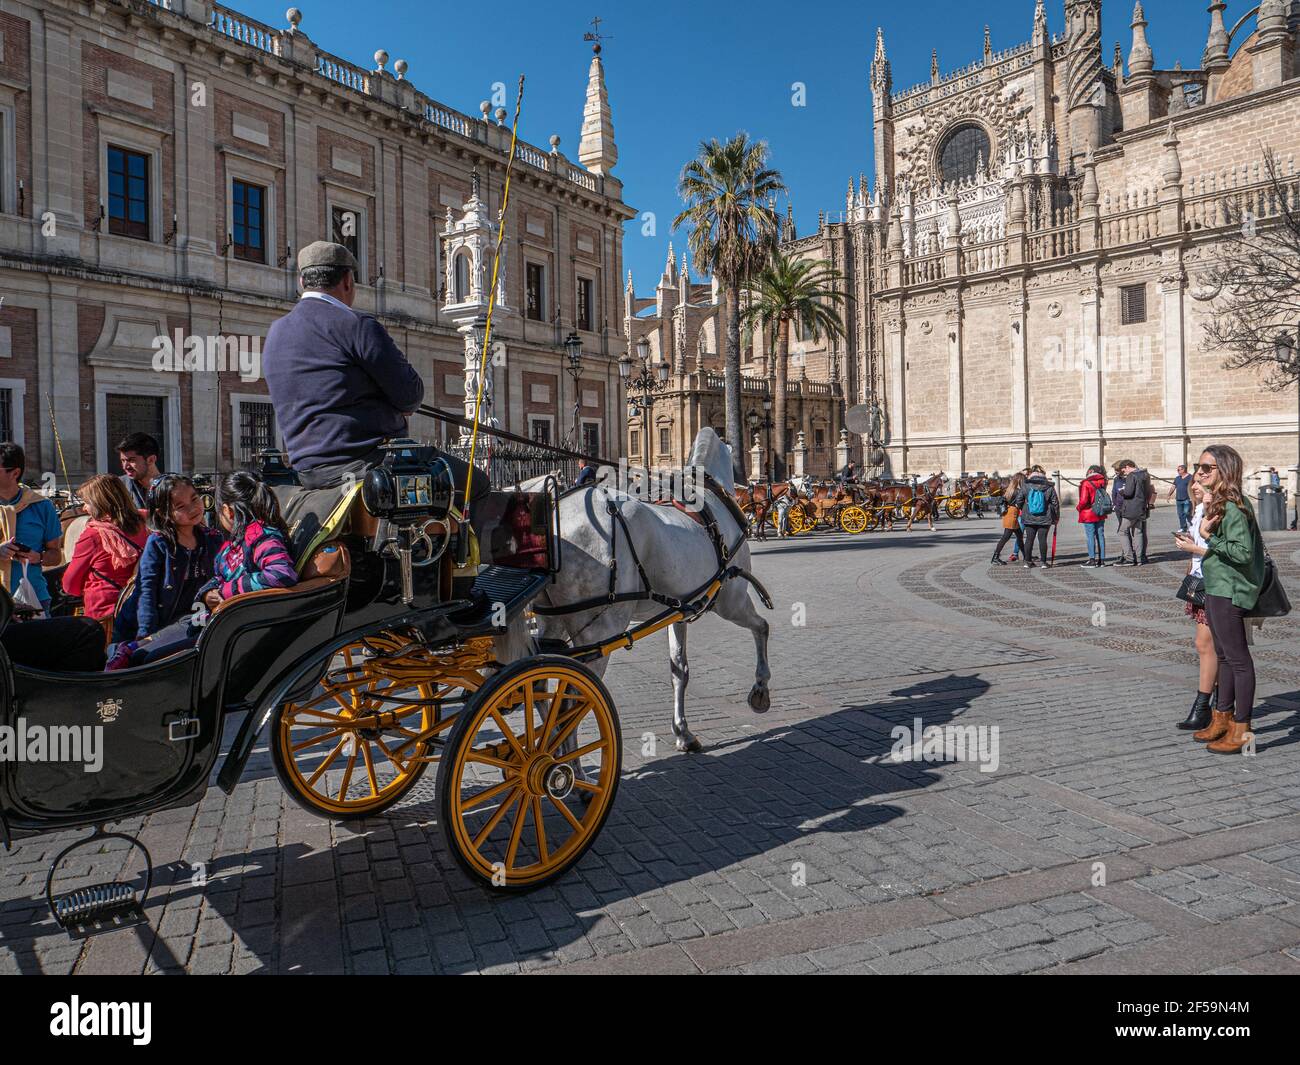 A horse and carriage taking tourists on a tour of the city centre in Seville Spain. Stock Photo